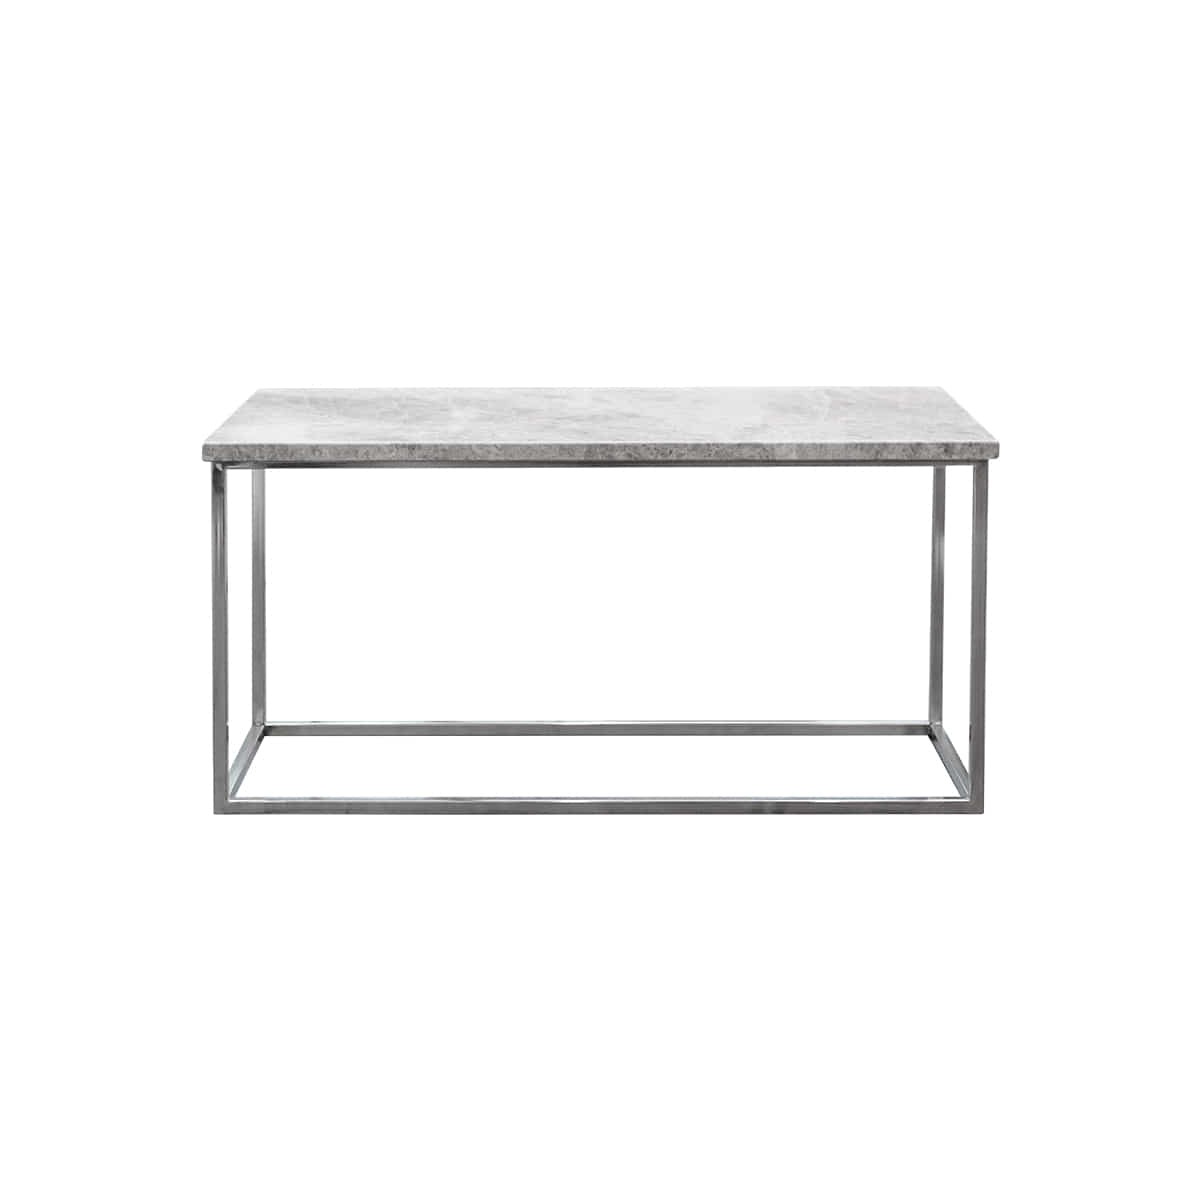 Zacc collection by SEDECMarble Side Table 대리석 사이드테이블 